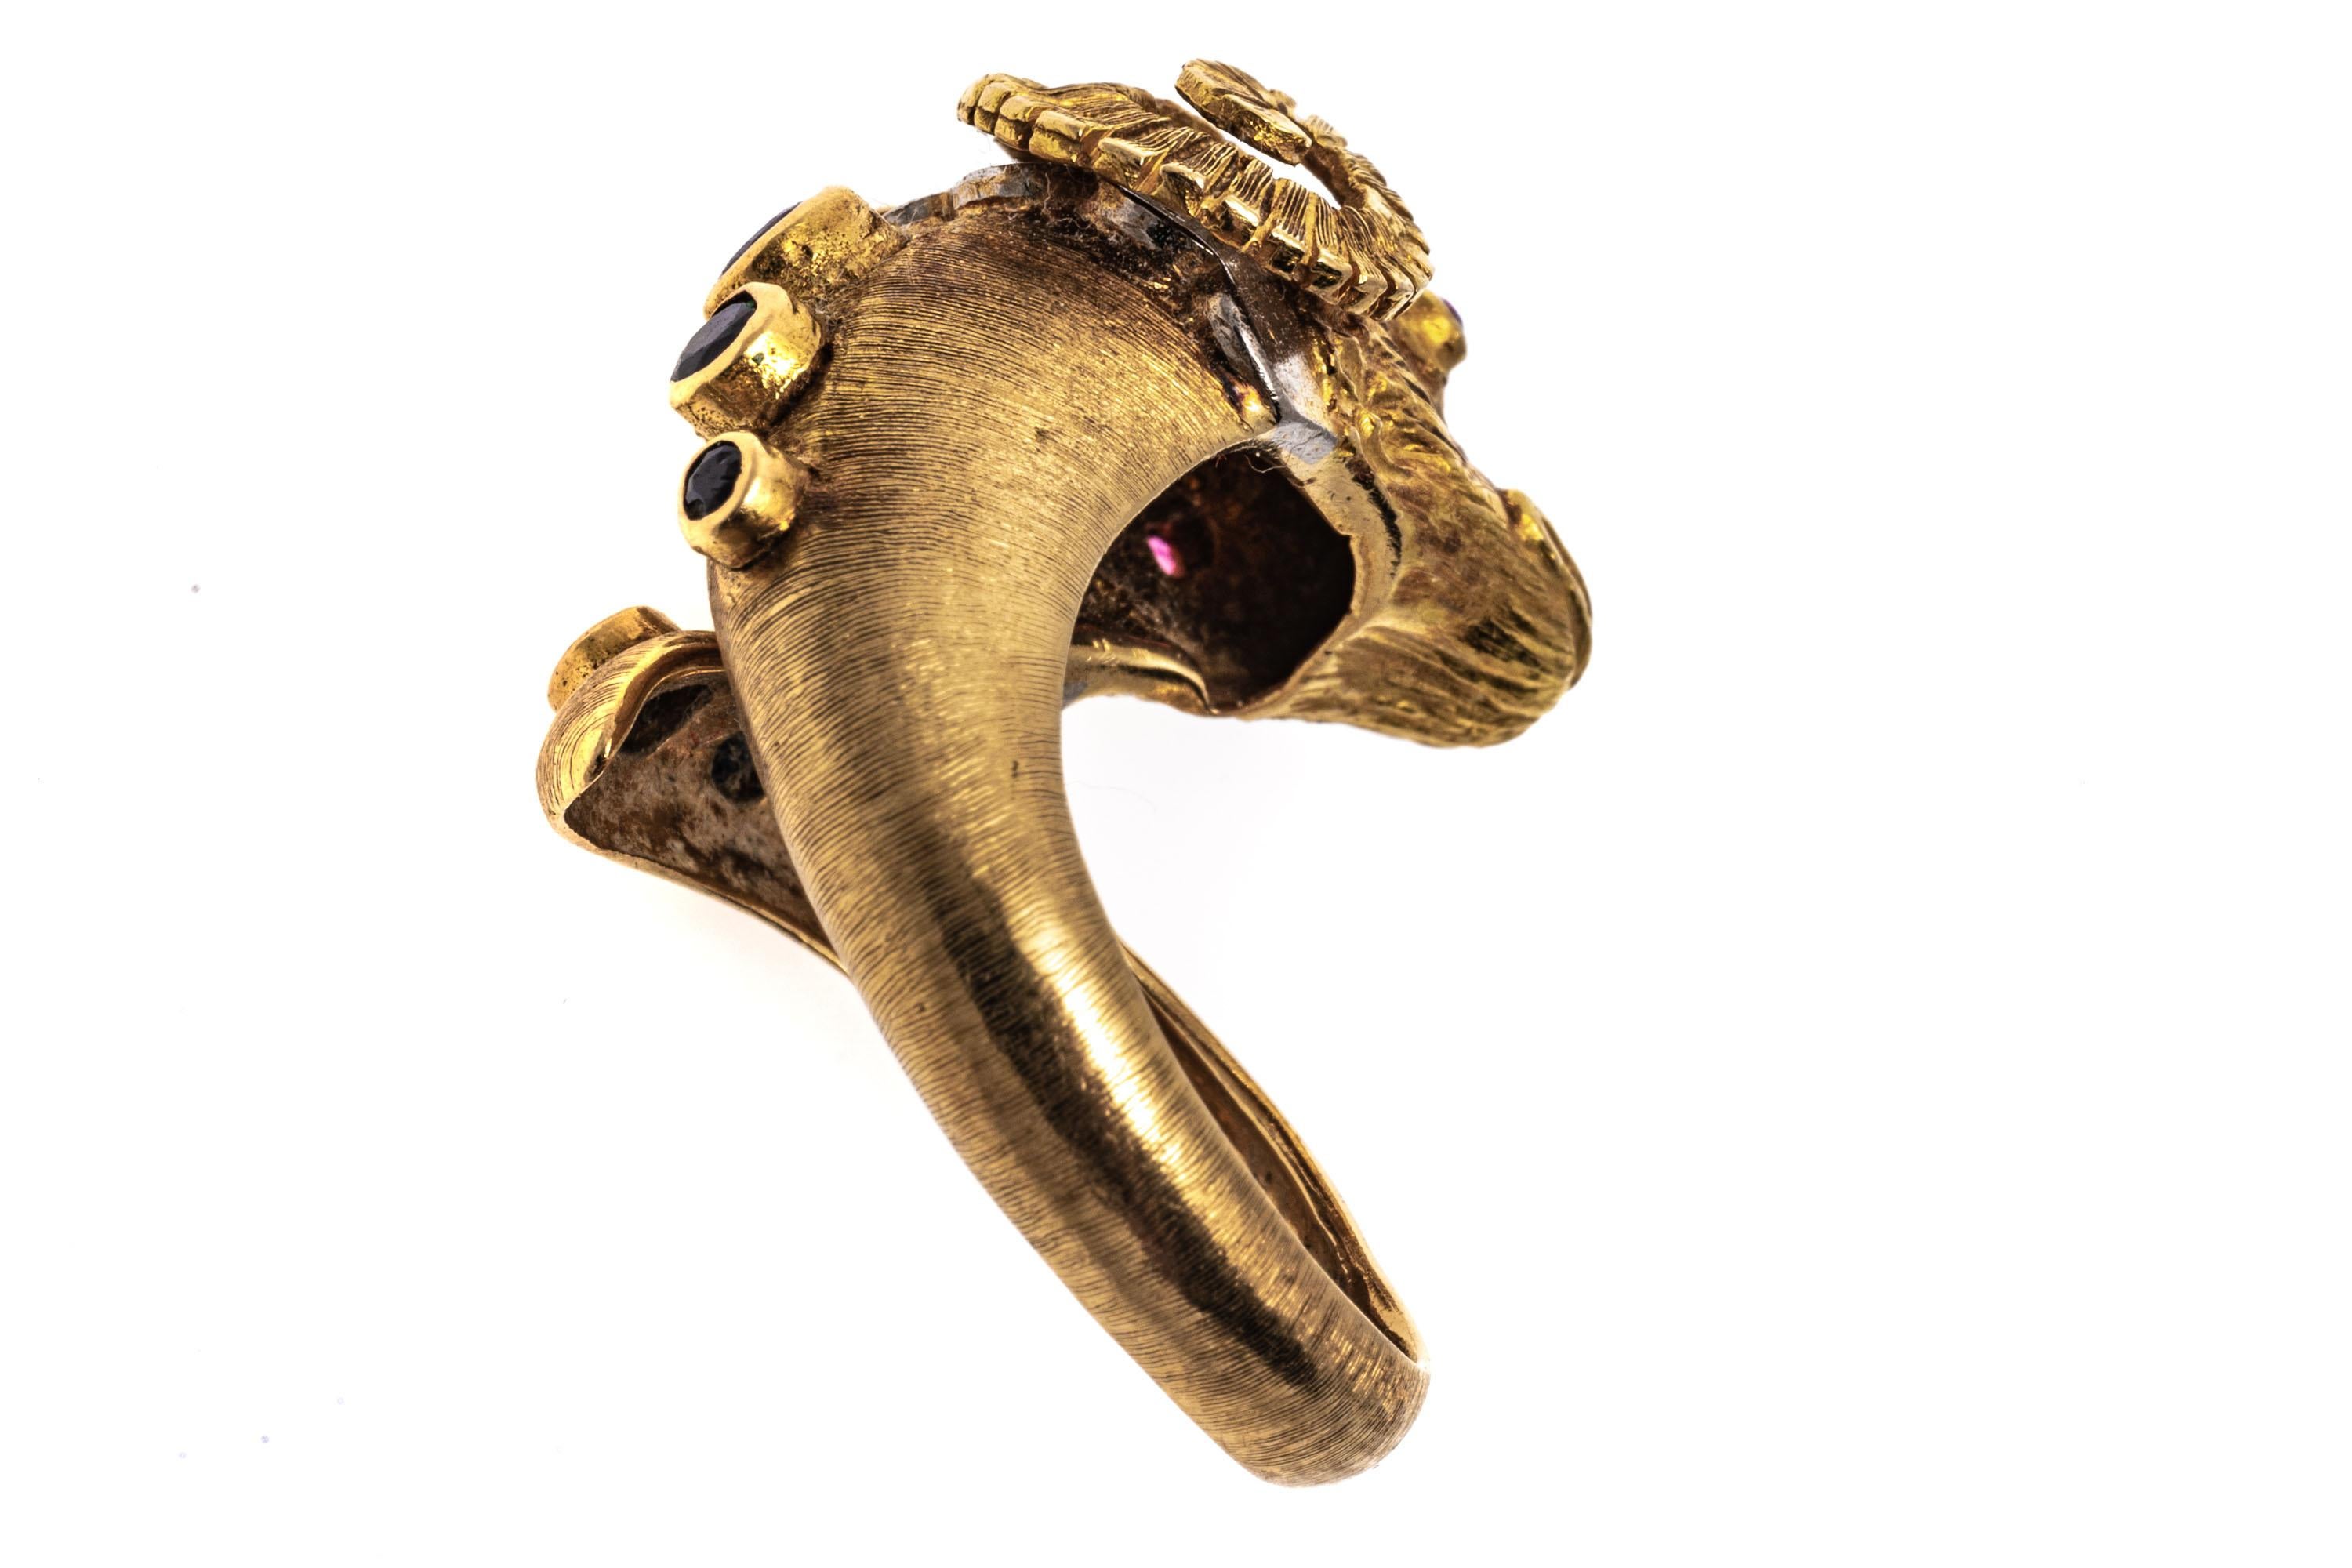 Modern 14k Yellow Gold Rams Head Ring With Sapphires, Rubies And Diamonds, Size 7-8 For Sale